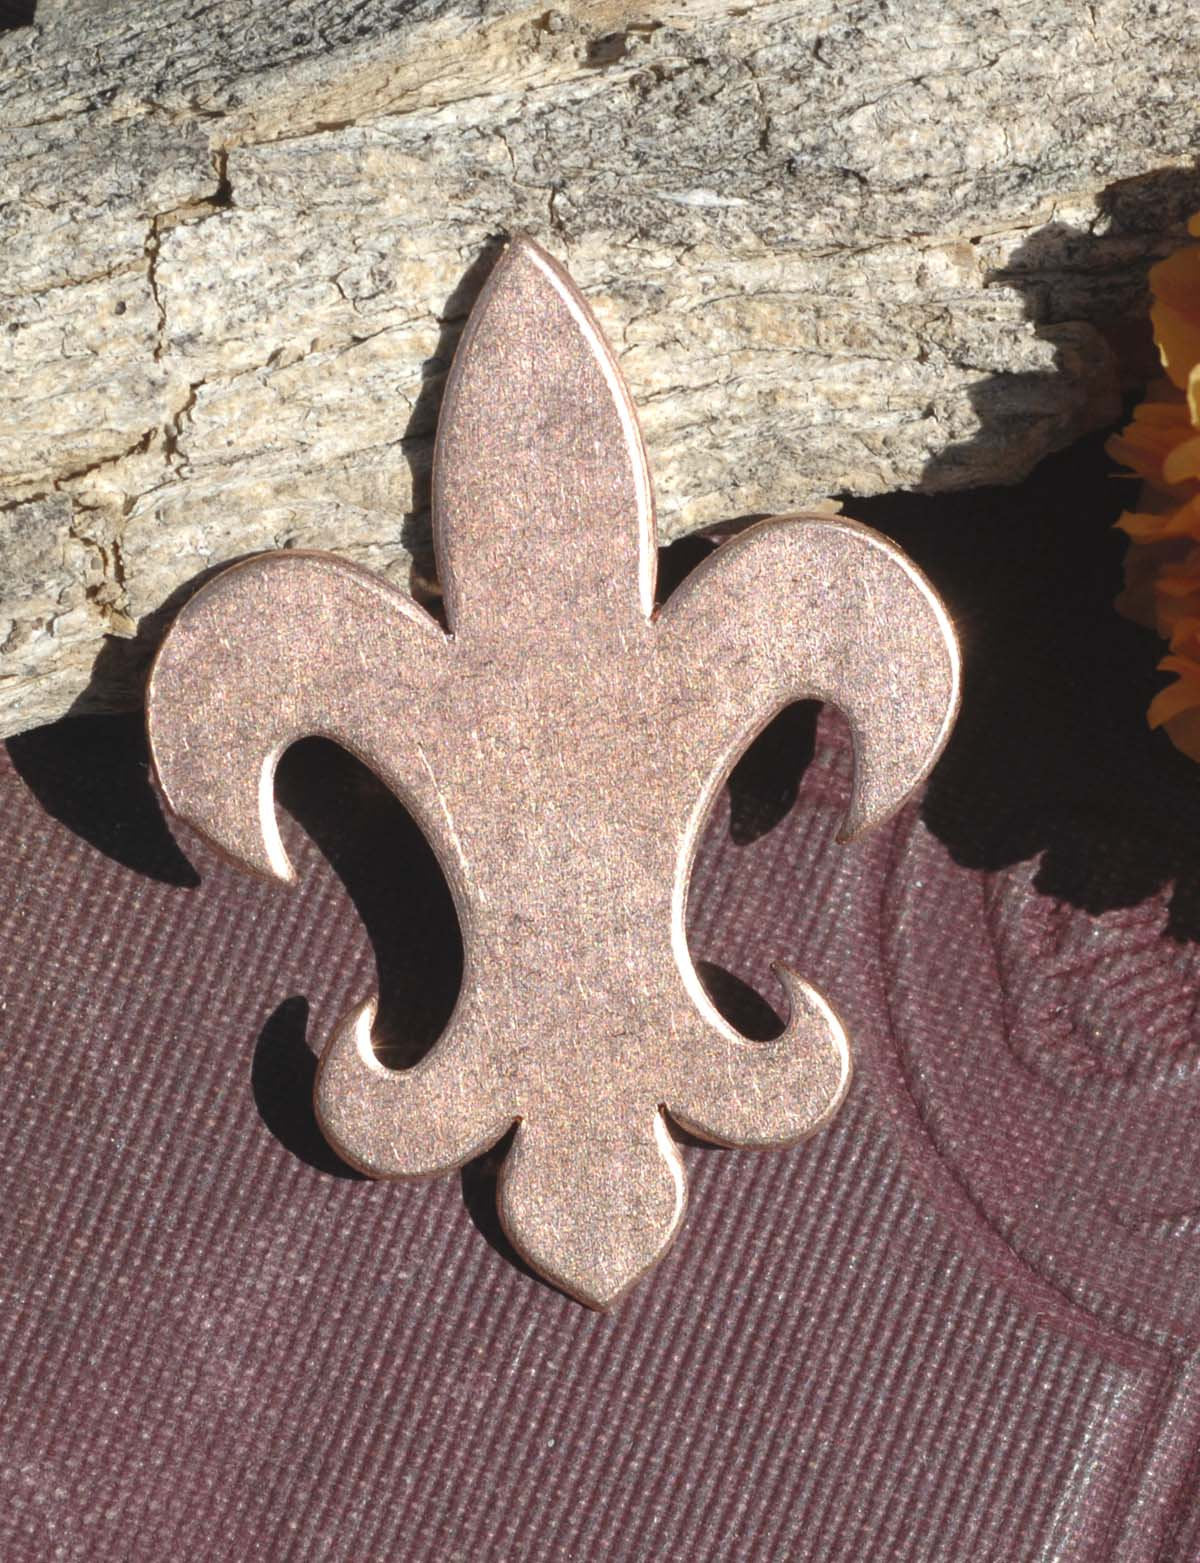 Fleur De Lis Charm 39mm x 29.6mm for Enameling Stamping Texturing Blank - Metal Supplies, Variety of Metals